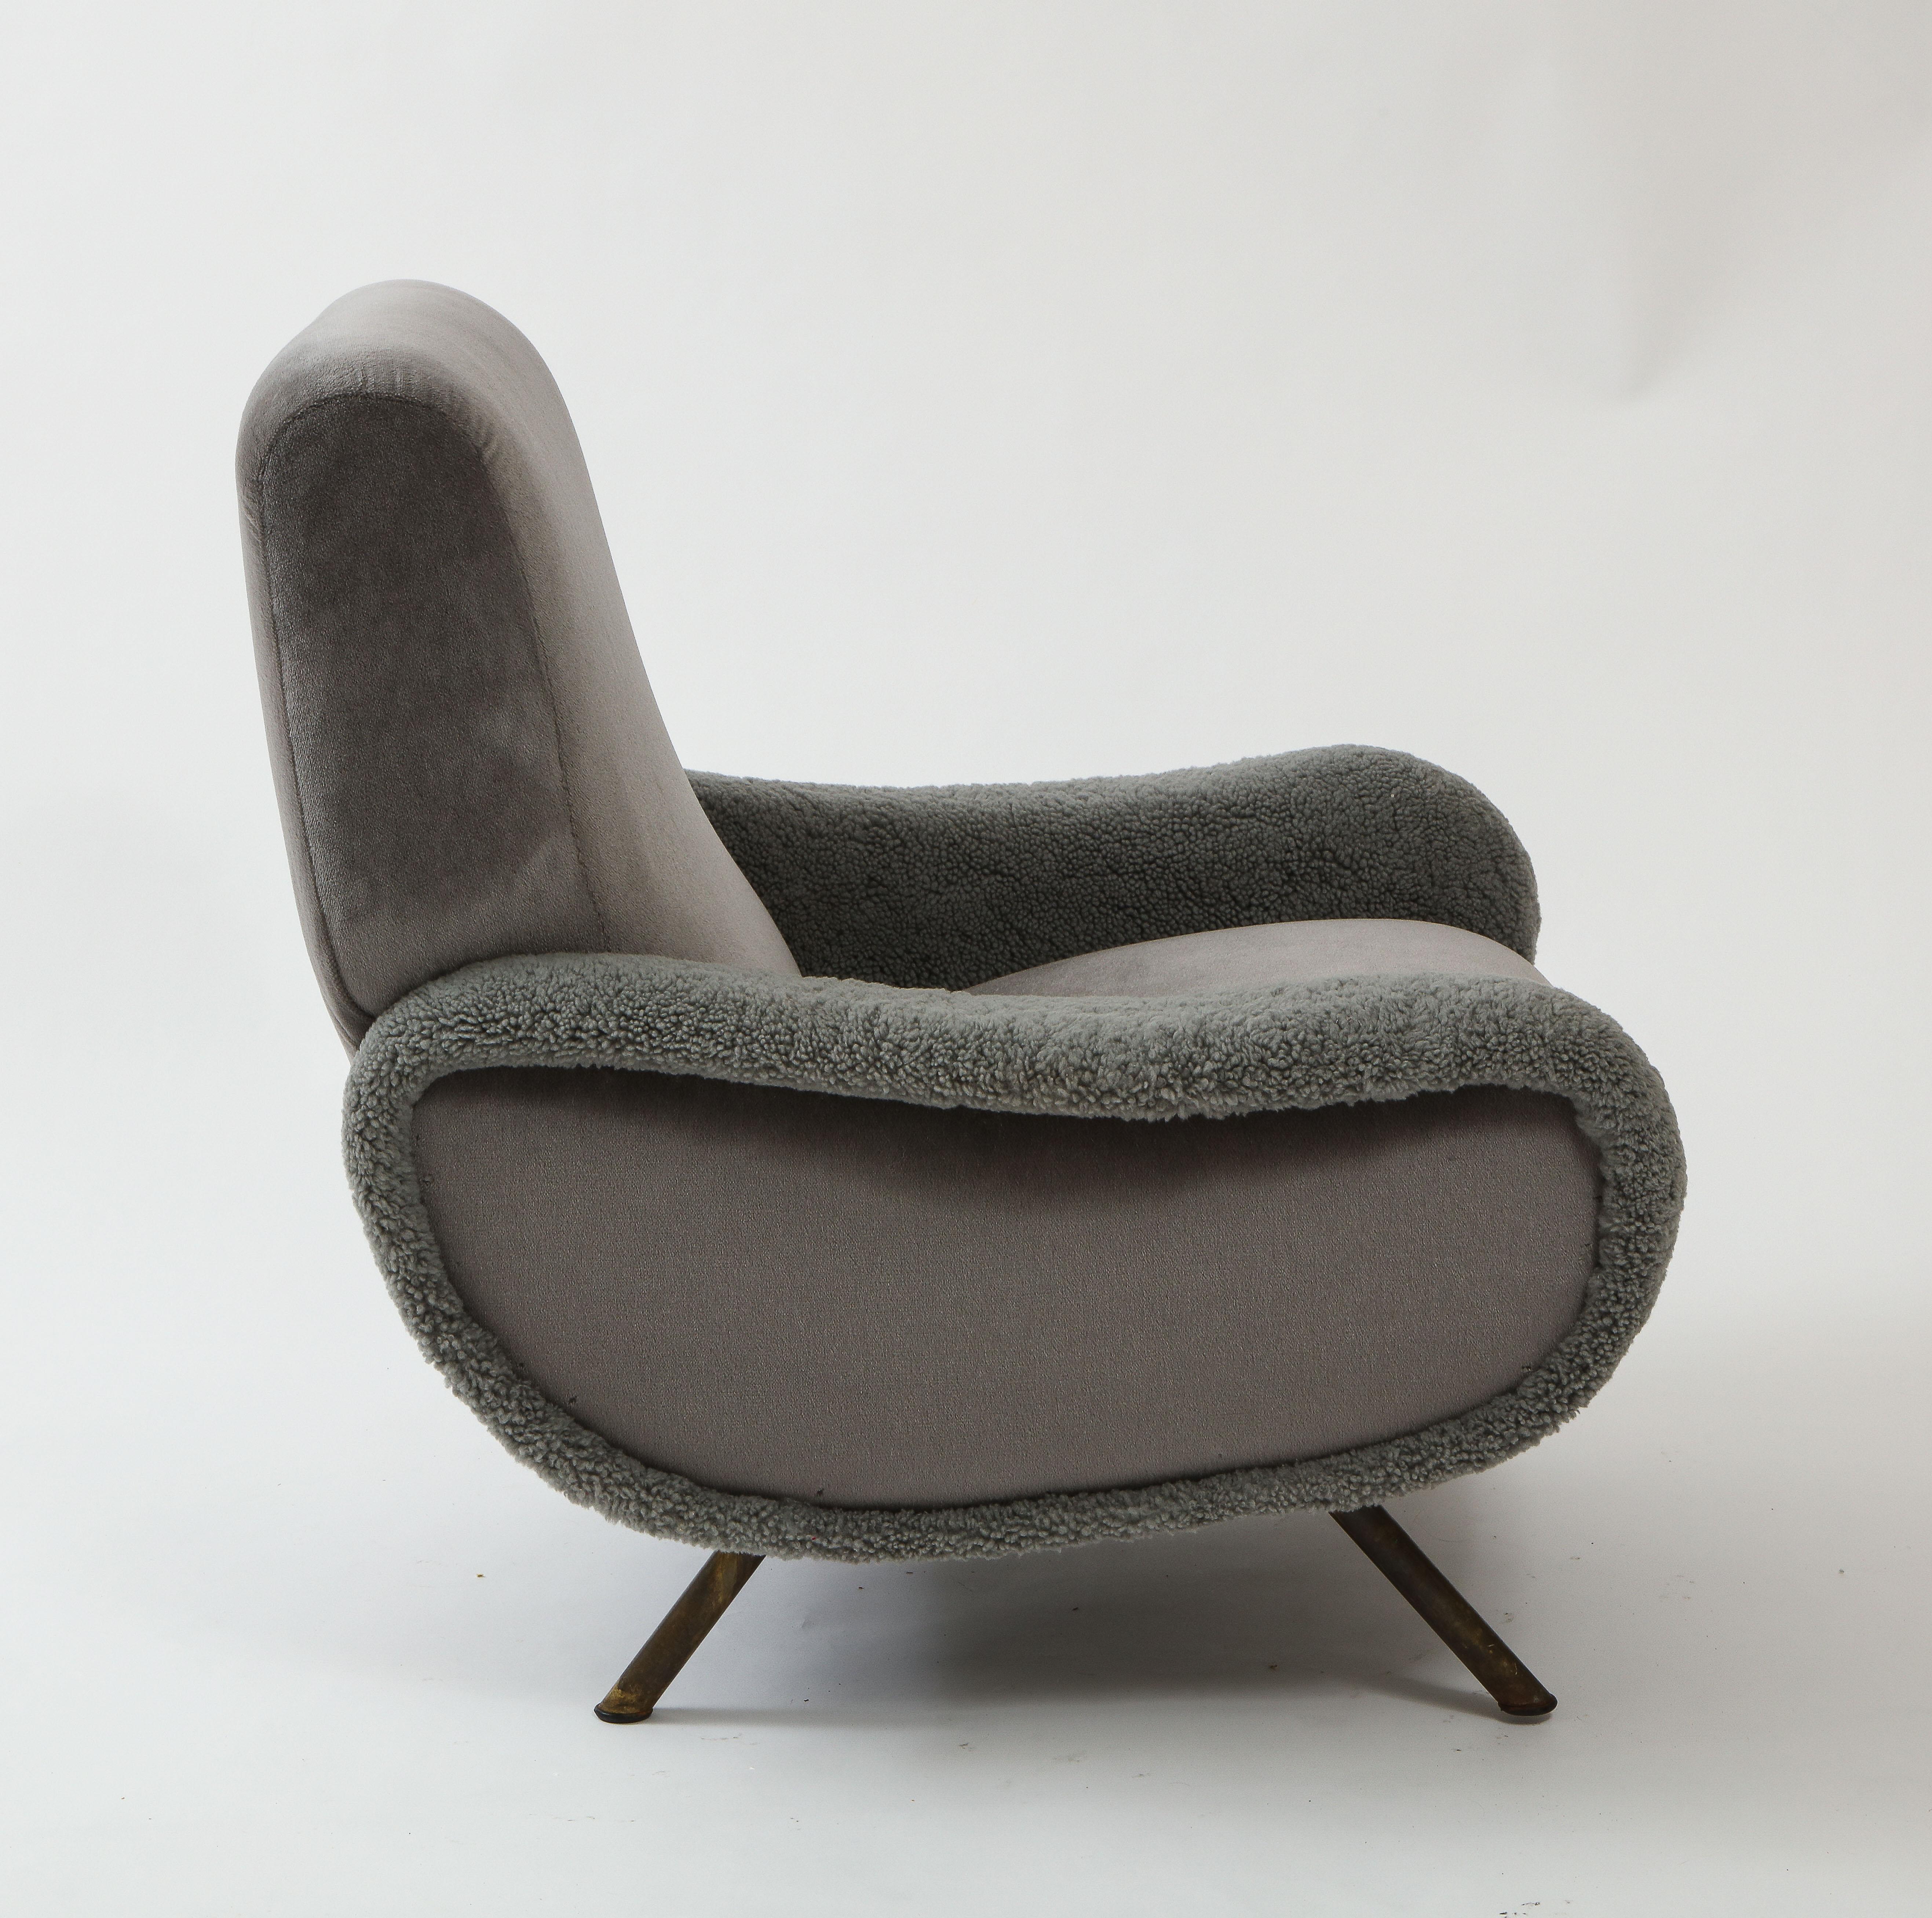 Marco Zanuso Arflex Lady Chair, Mohair and Shearling, Midcentury, Italy 1